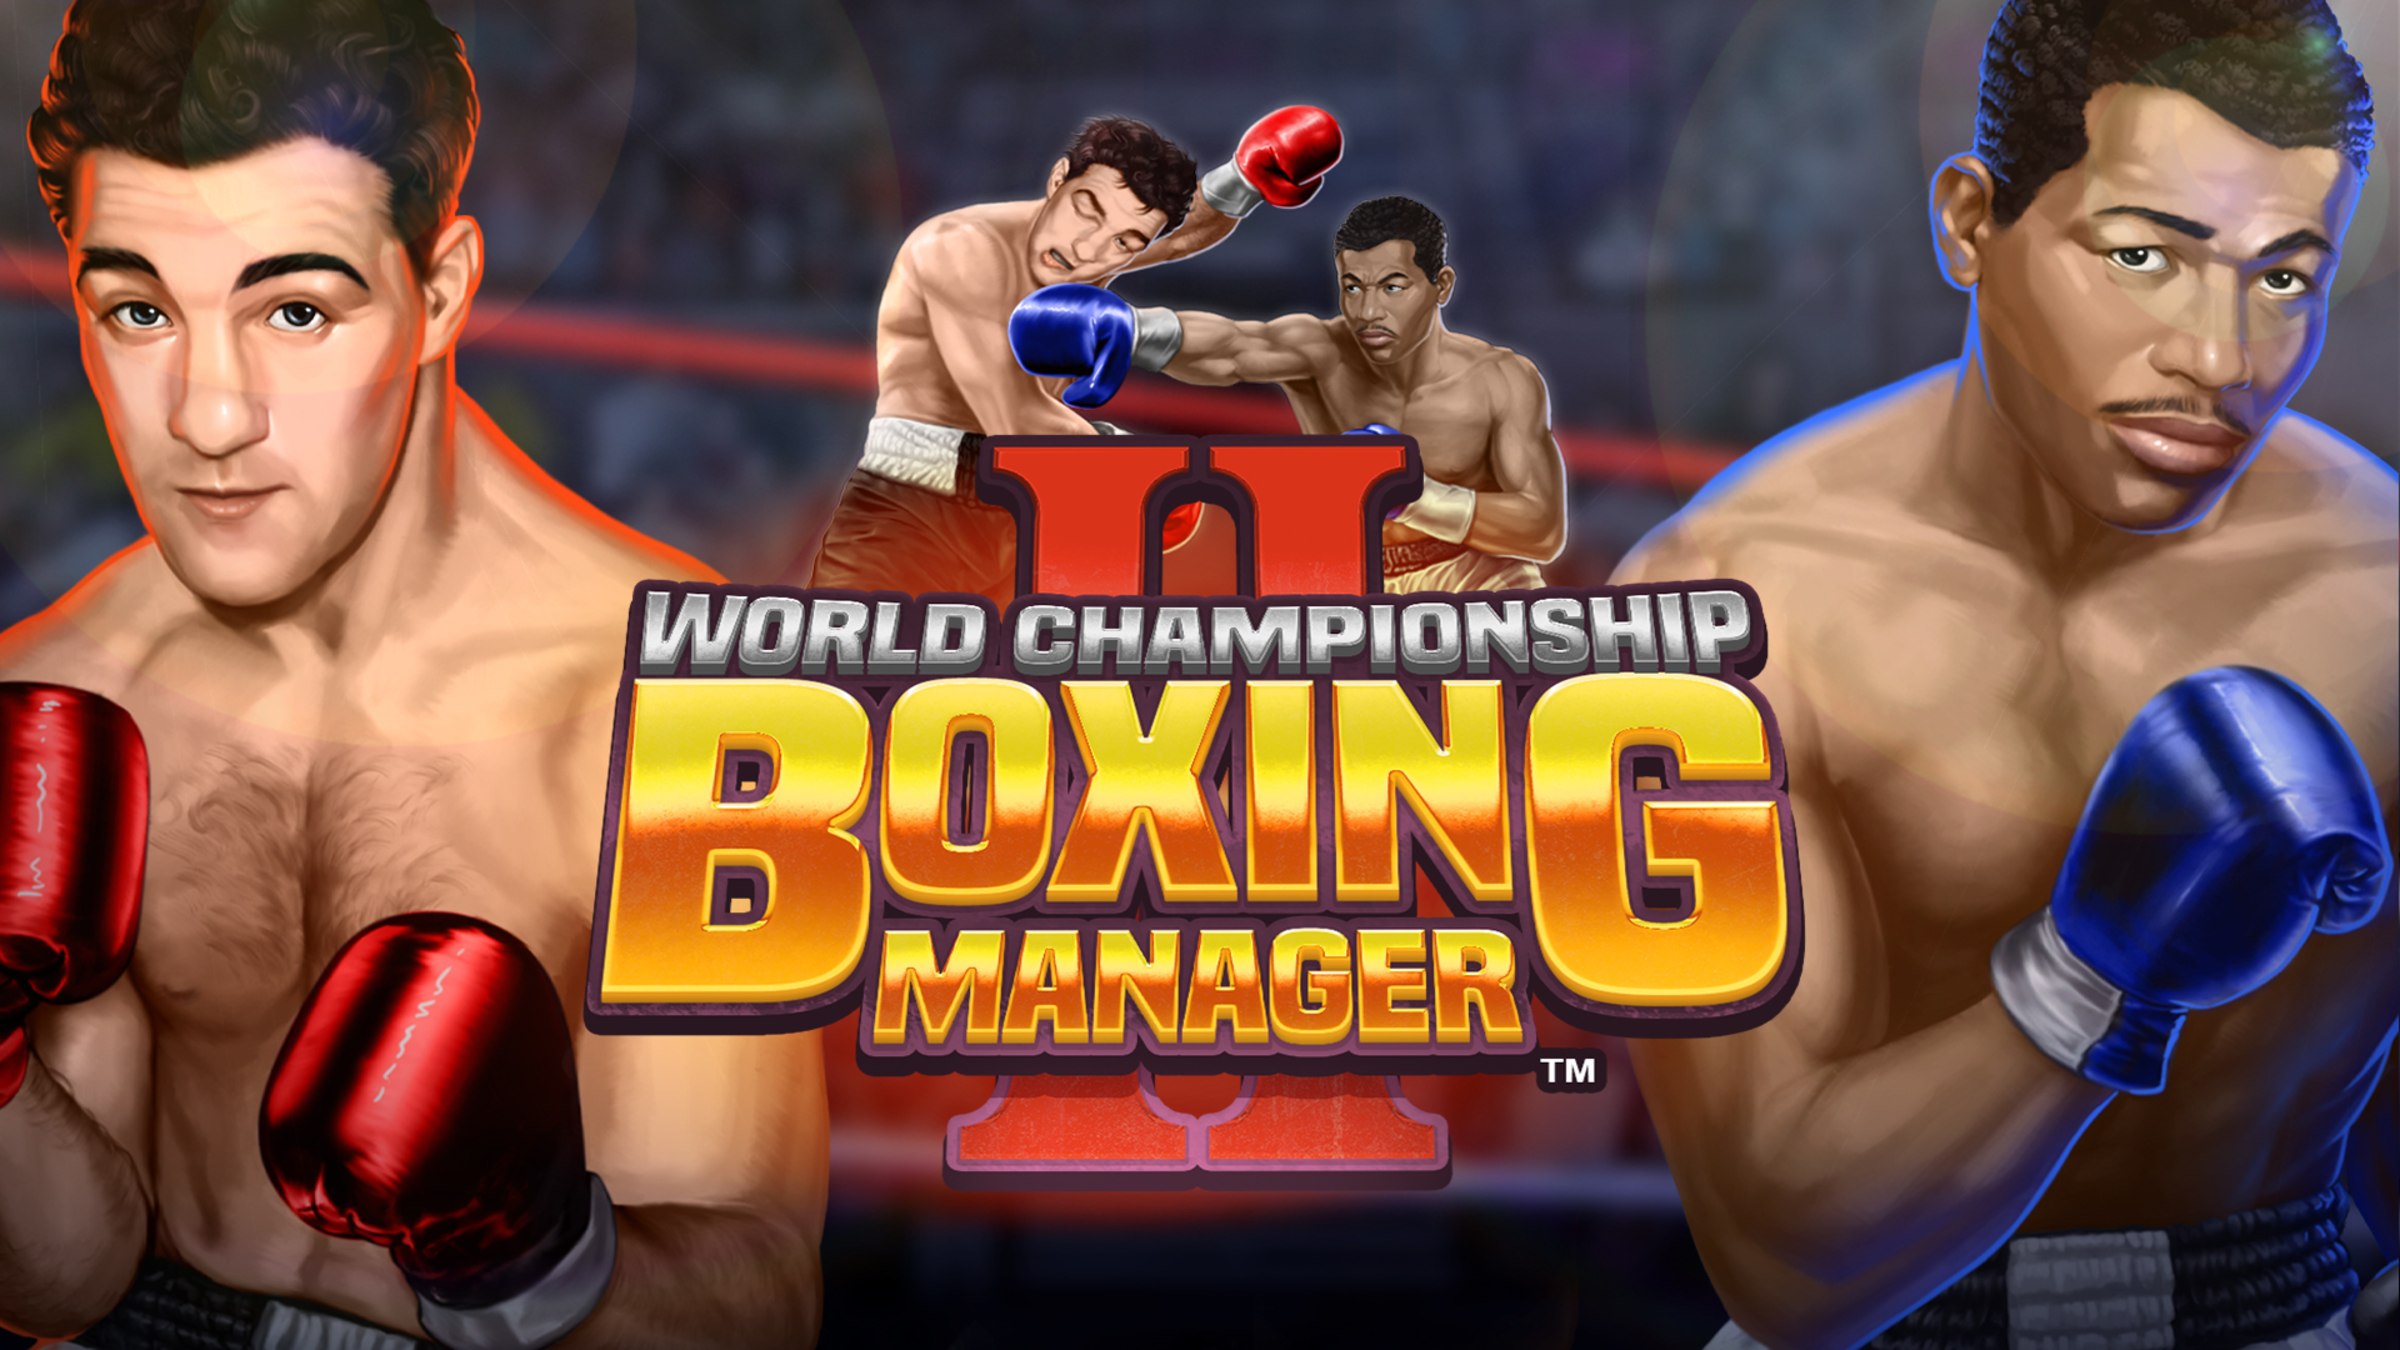 World Championship Boxing Manager 2 - Official Console Launch Trailer 